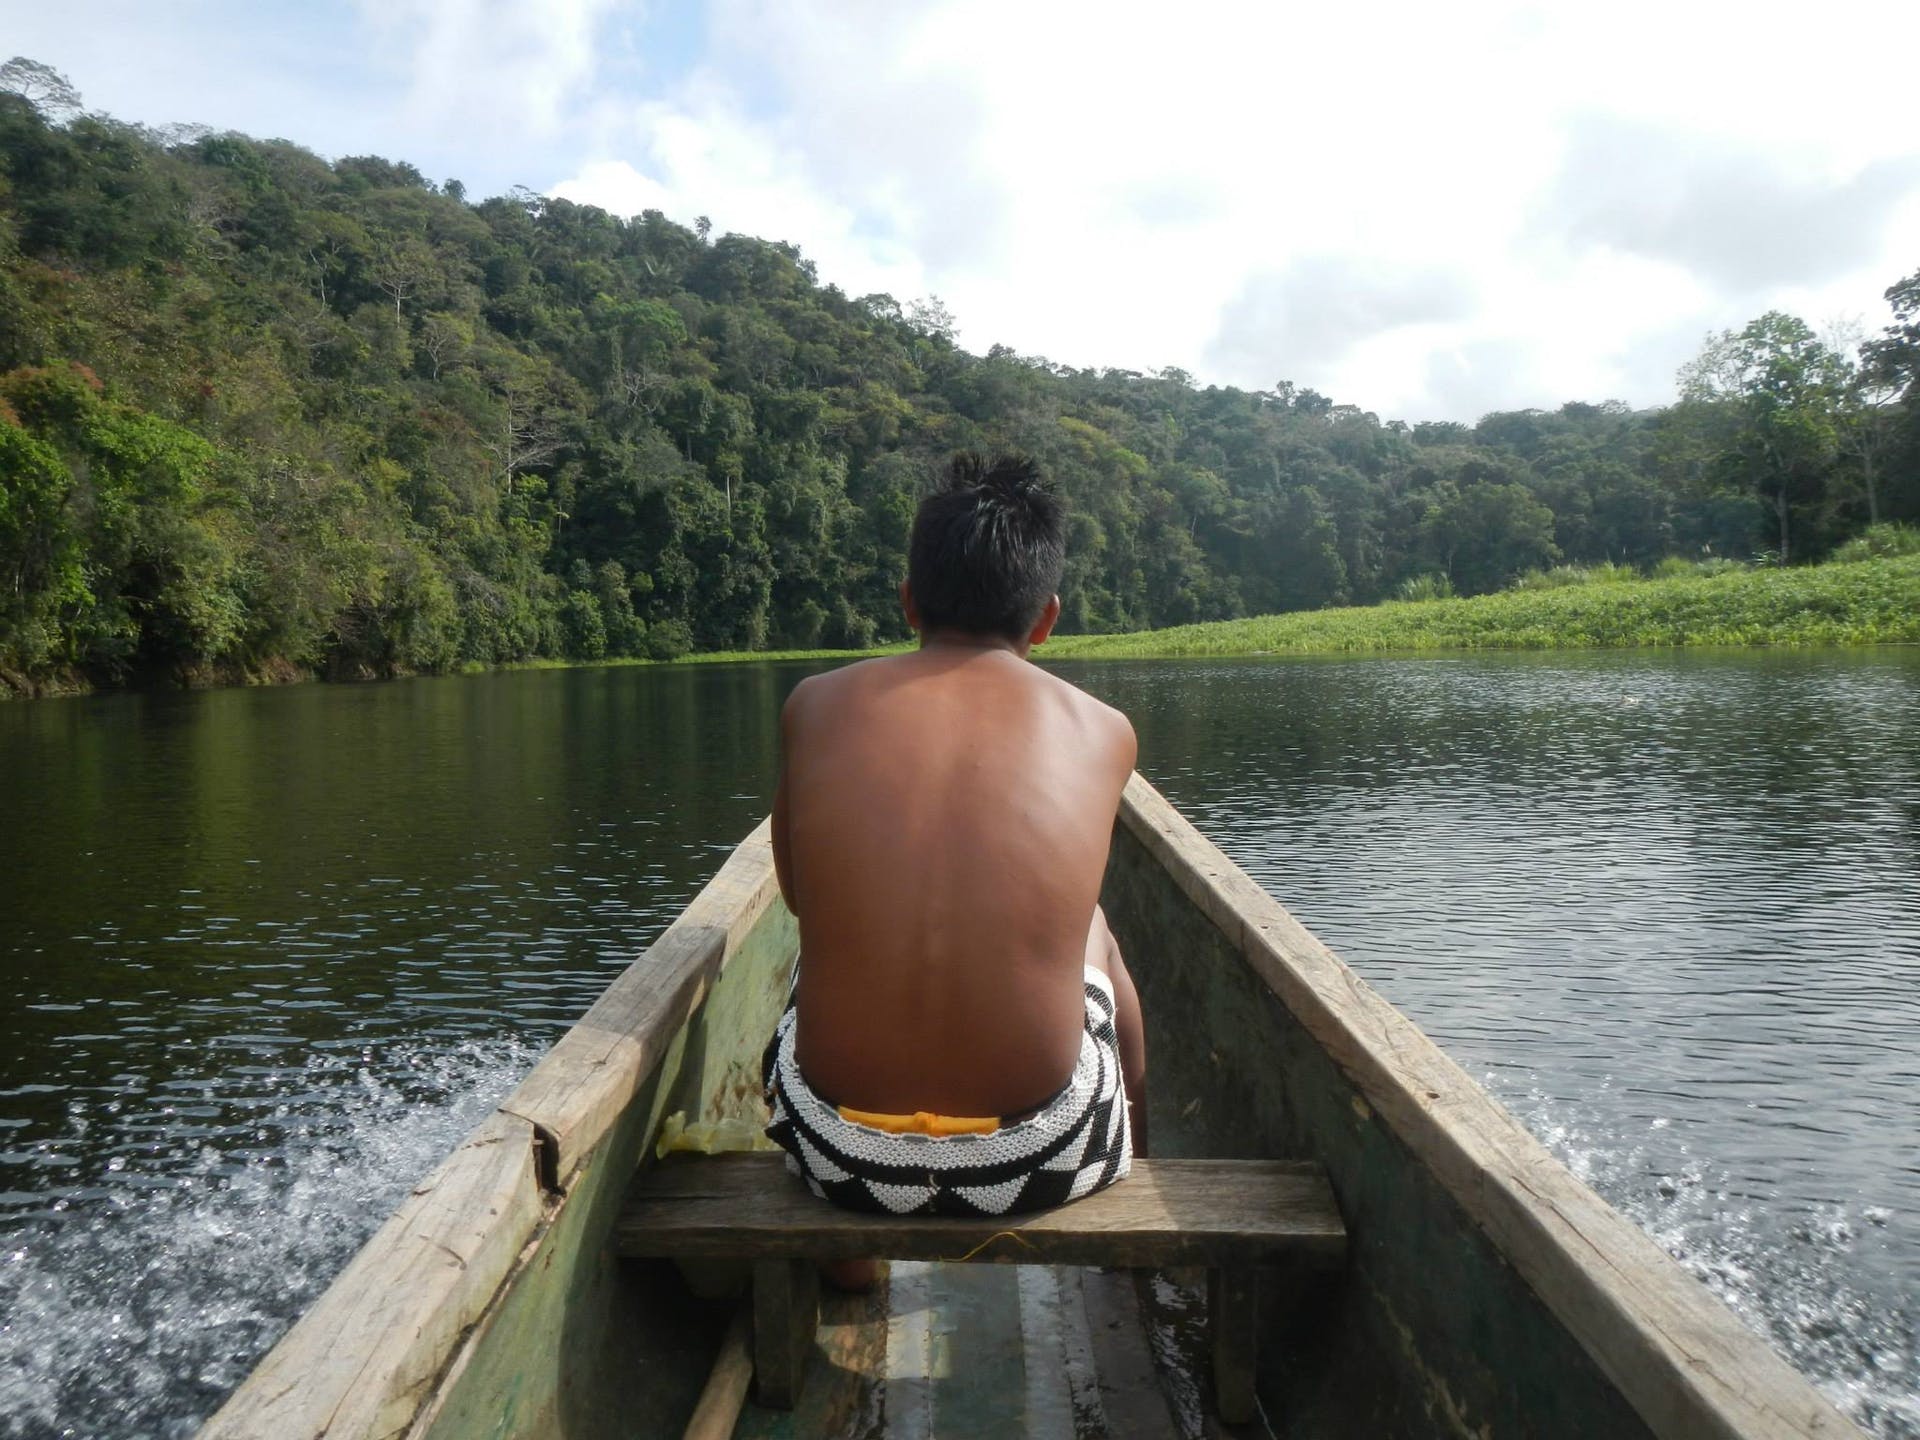 An indigenous guide working with Javier leads a team up the river, flanked by lush green forests.